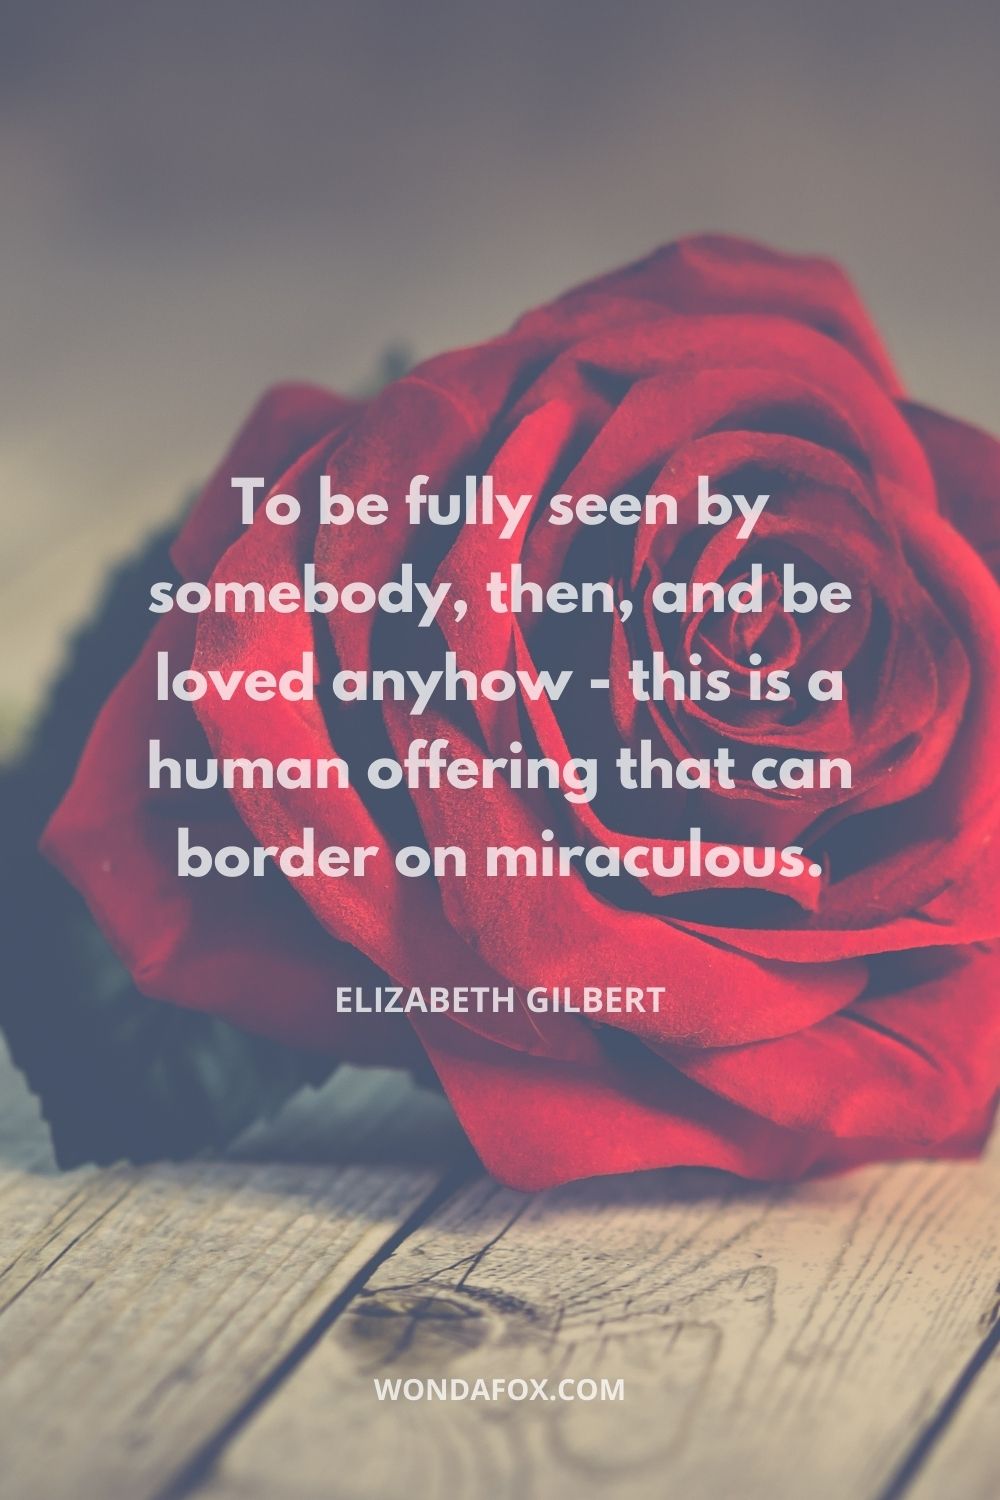 To be fully seen by somebody, then, and be loved anyhow - this is a human offering that can border on miraculous.